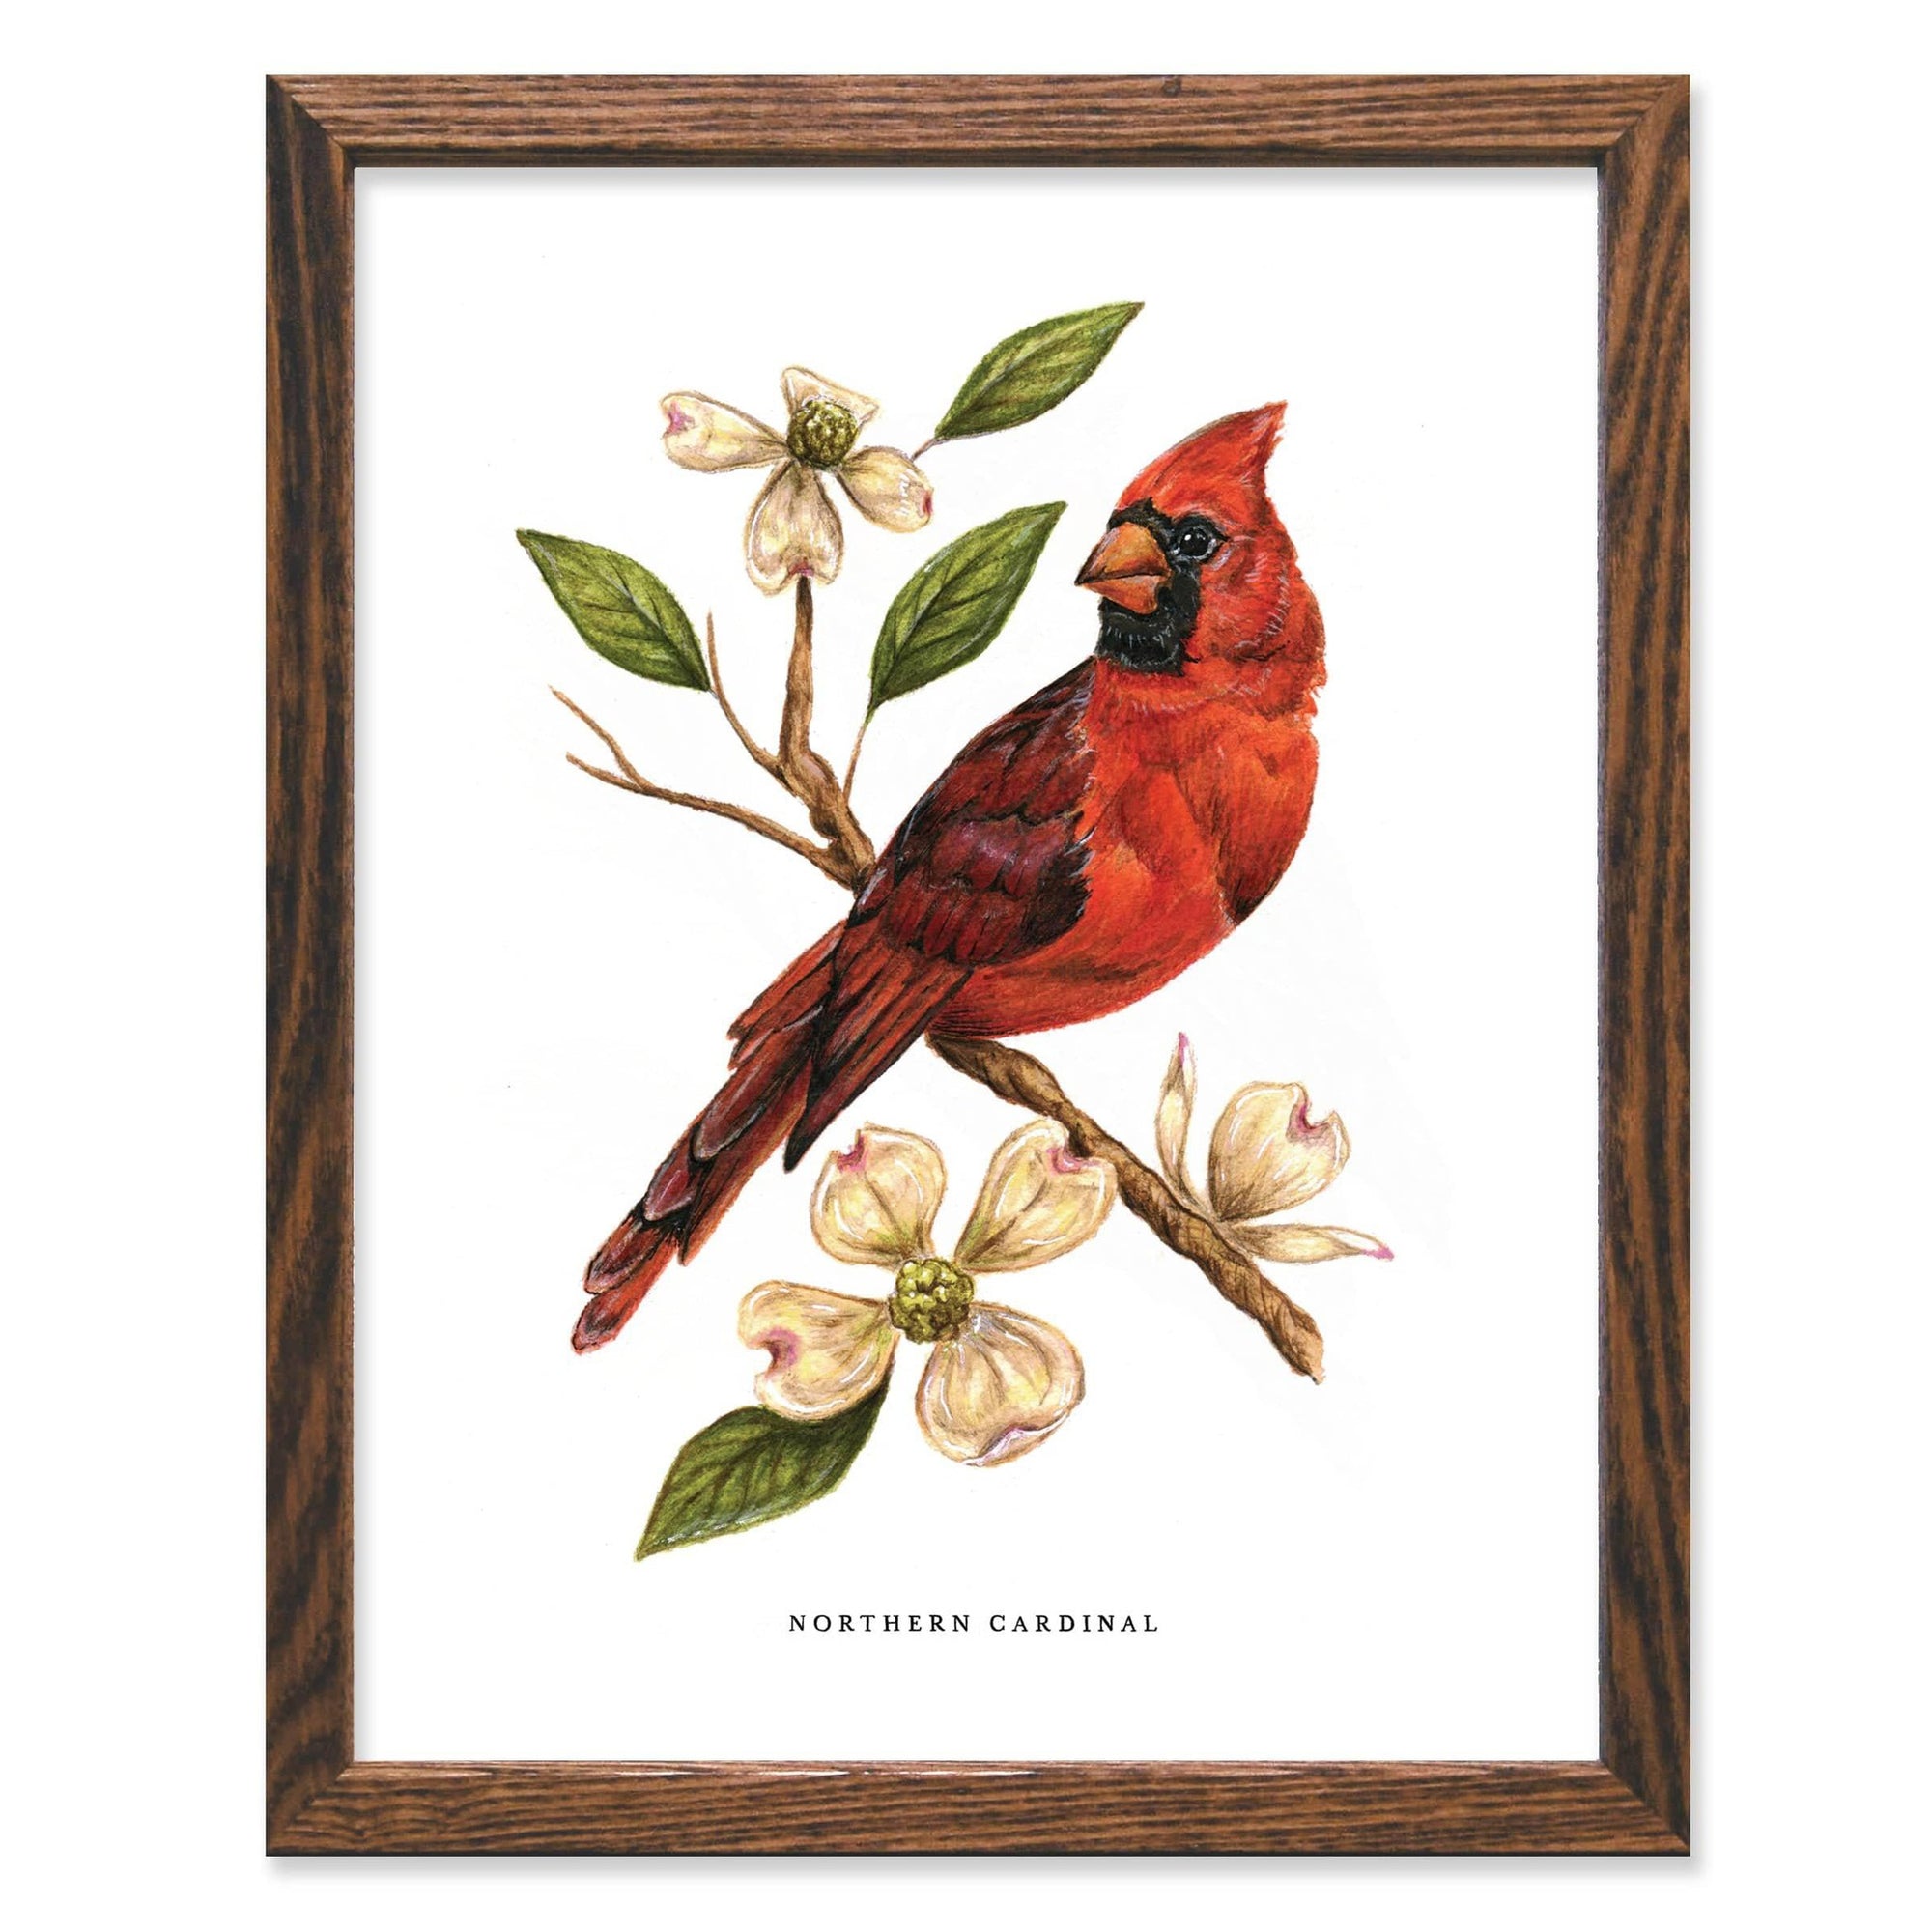 A Cardinal and Dogwood 11x14 Art Print by The Wild Wander of a red cardinal sitting on a branch.